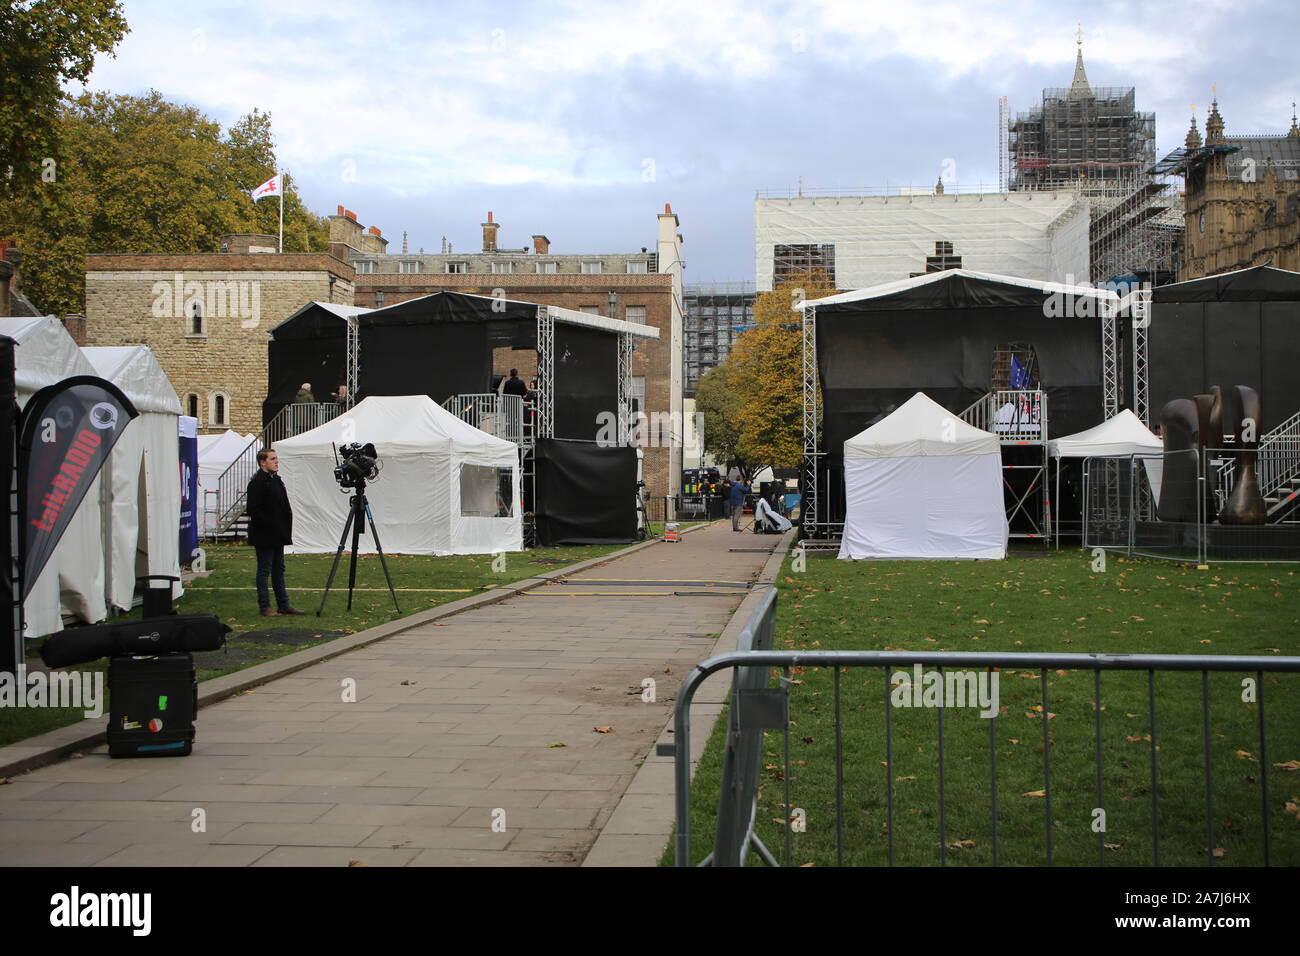 29 October 2019 London: Reporting on Brexit, a media village has sprung up outside the Houses of Parliament, London, UK Stock Photo